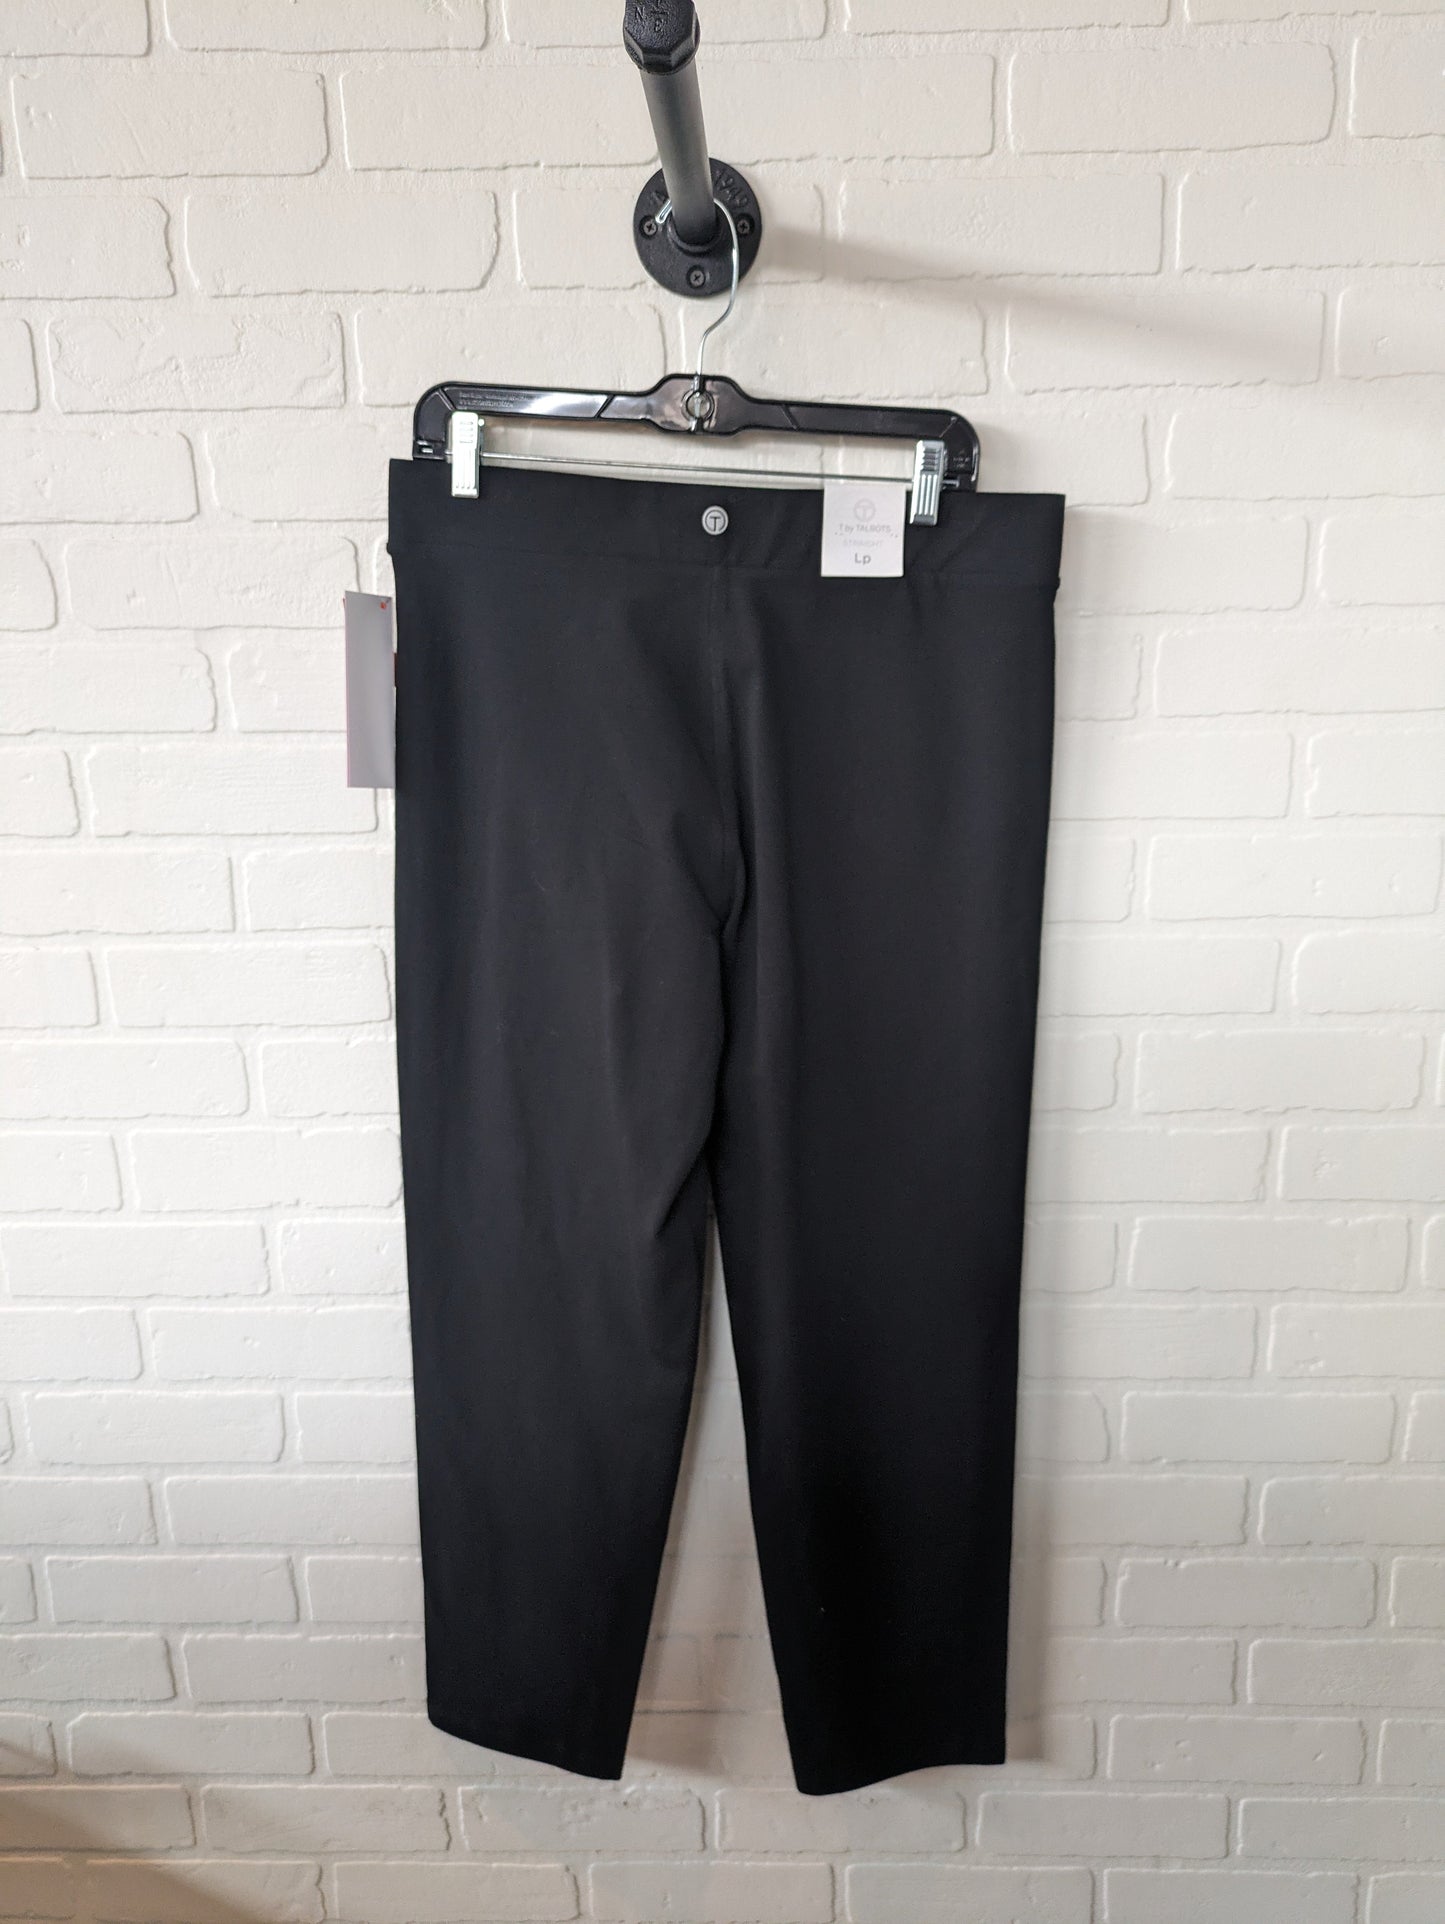 Pants Other By Talbots  Size: 12petite